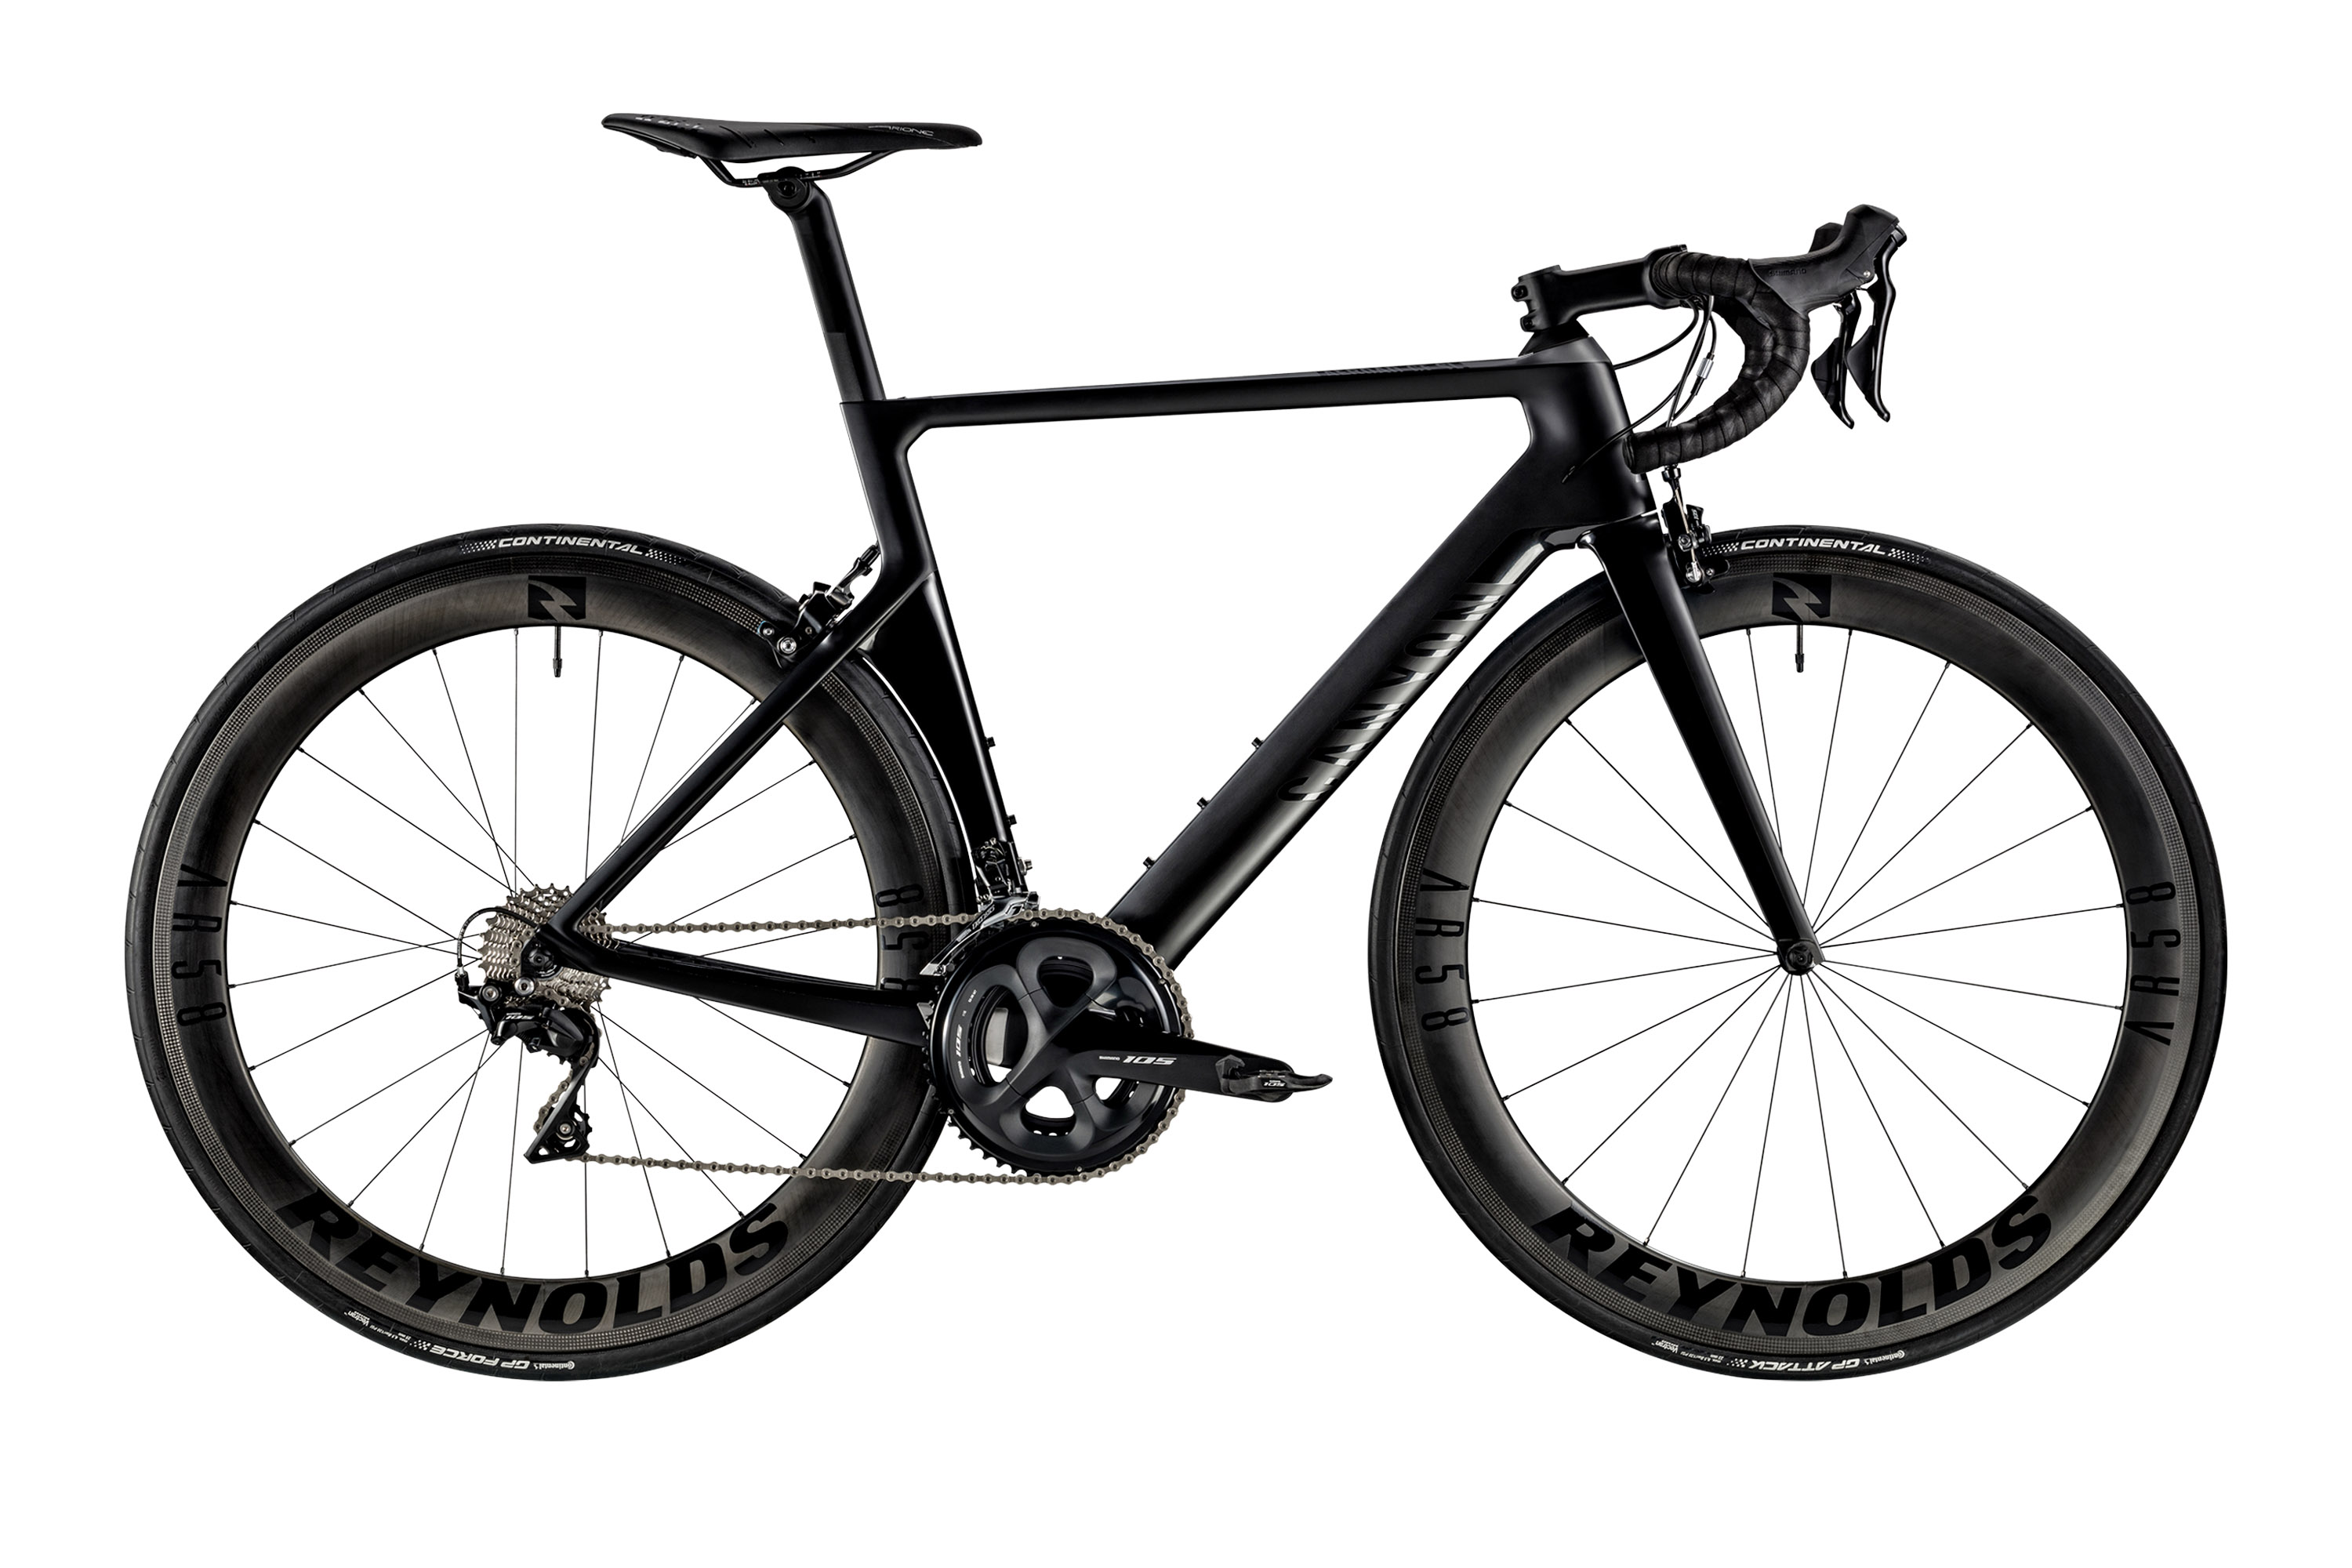 Best carbon road bikes Our pick of the best racing and endurance road